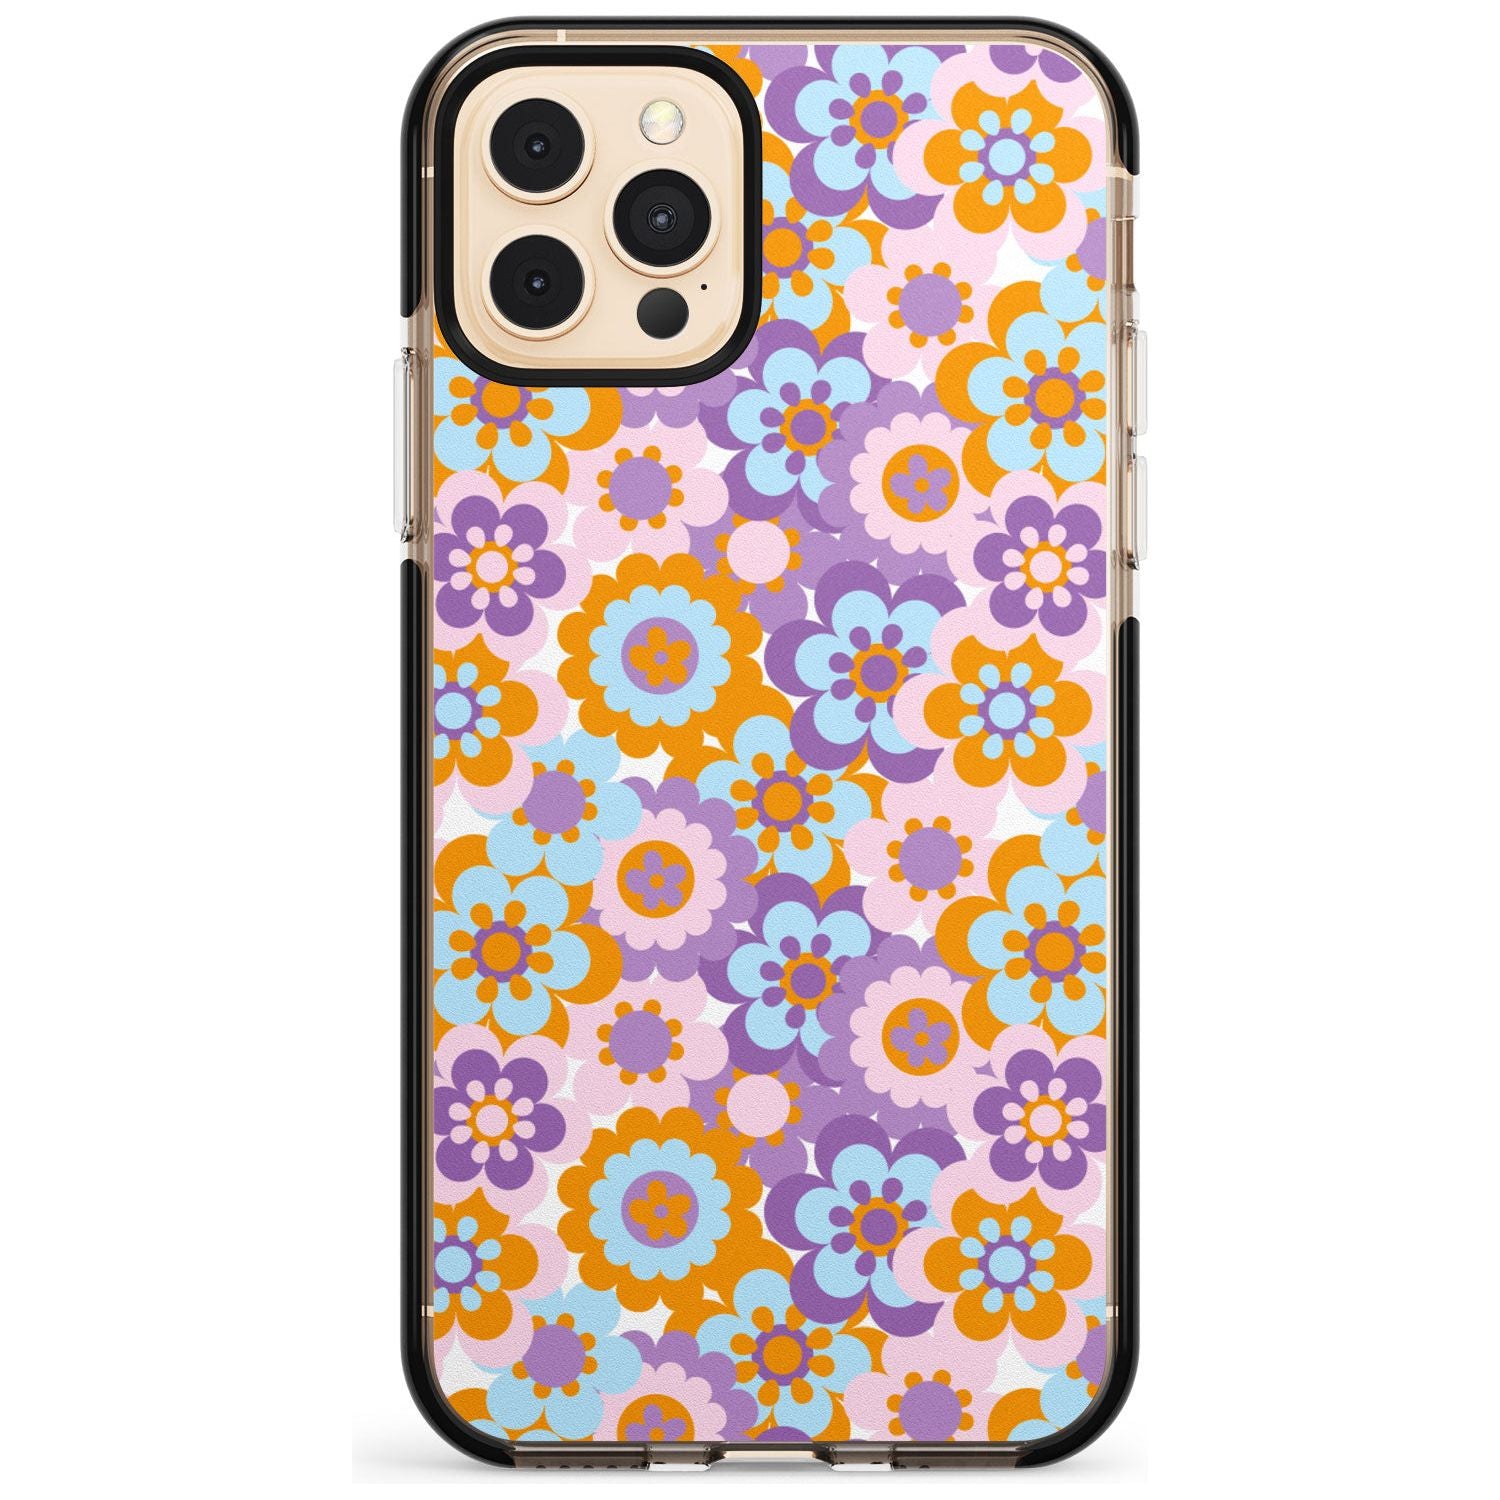 Flower Power Pattern Black Impact Phone Case for iPhone 11